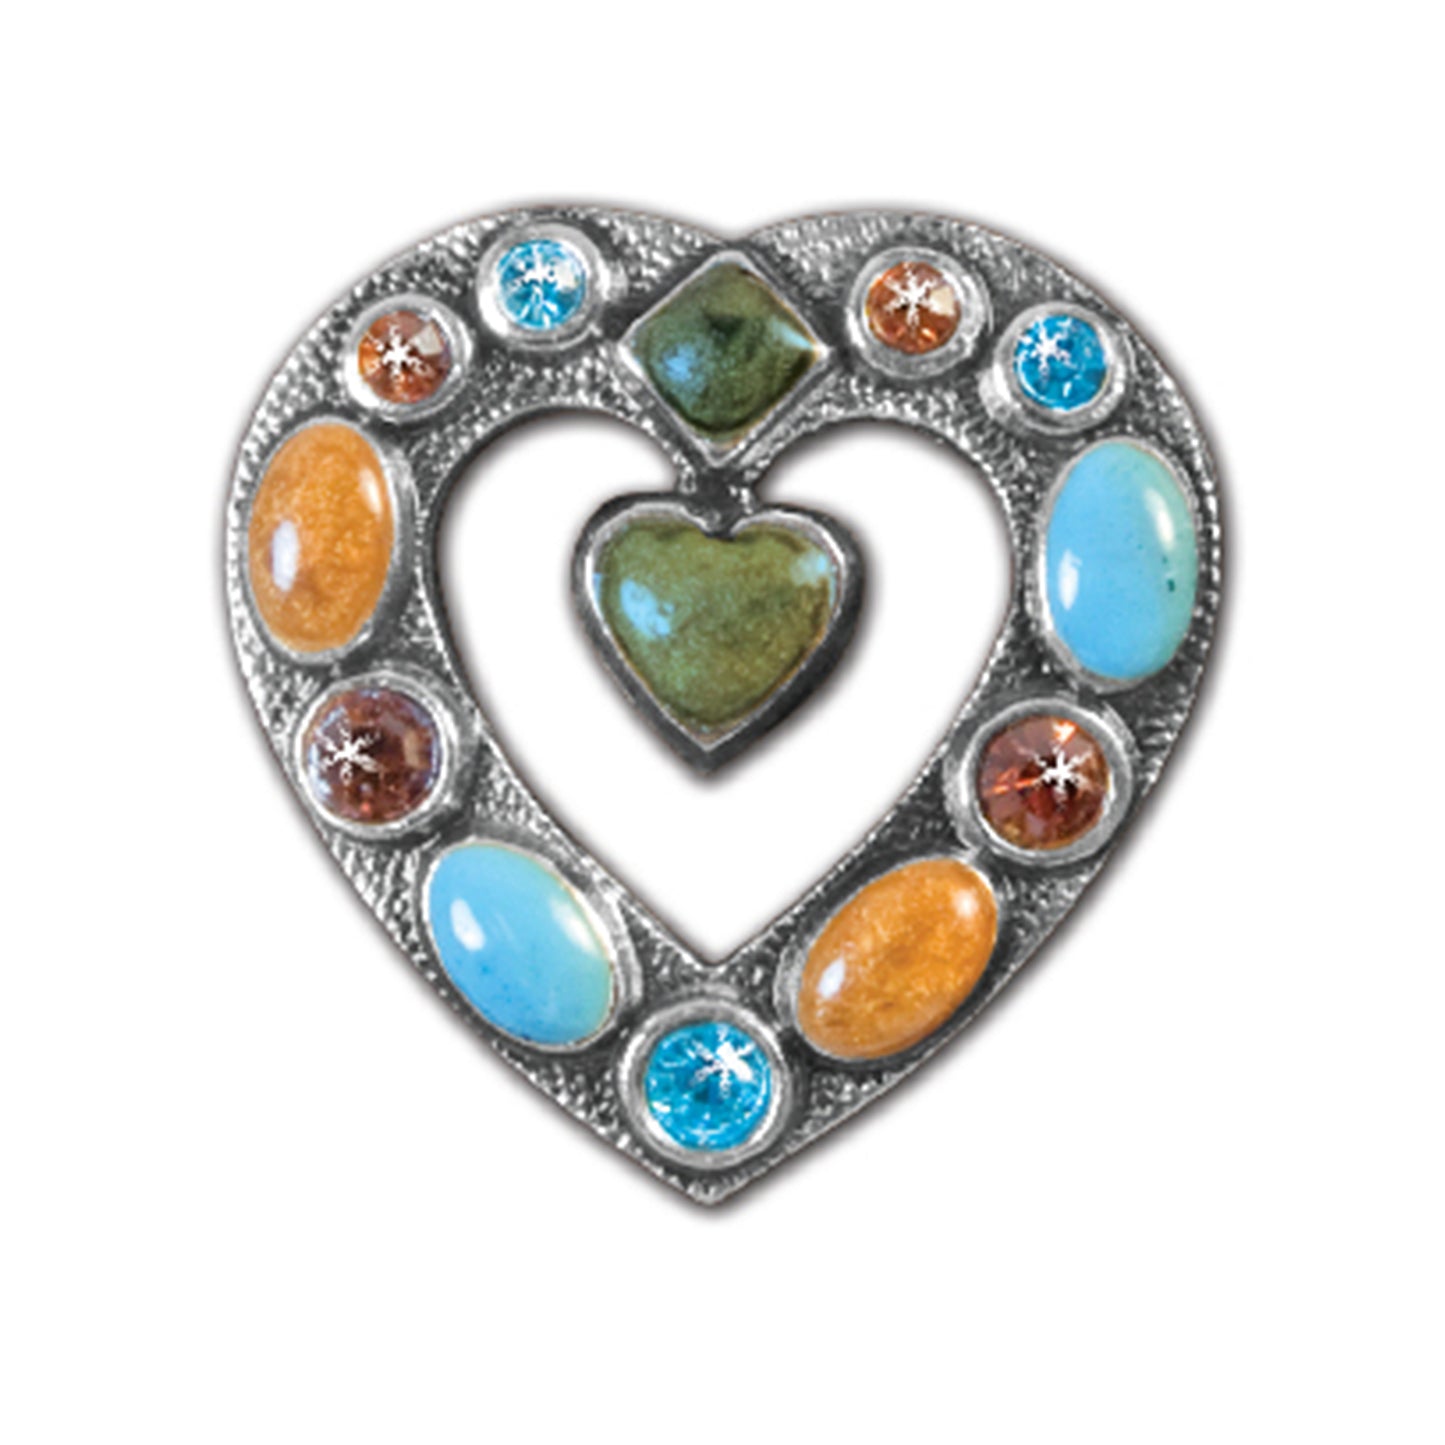 1-1/4" A2 Heart shape concho with multicolored stones and crystals (set of 4). 